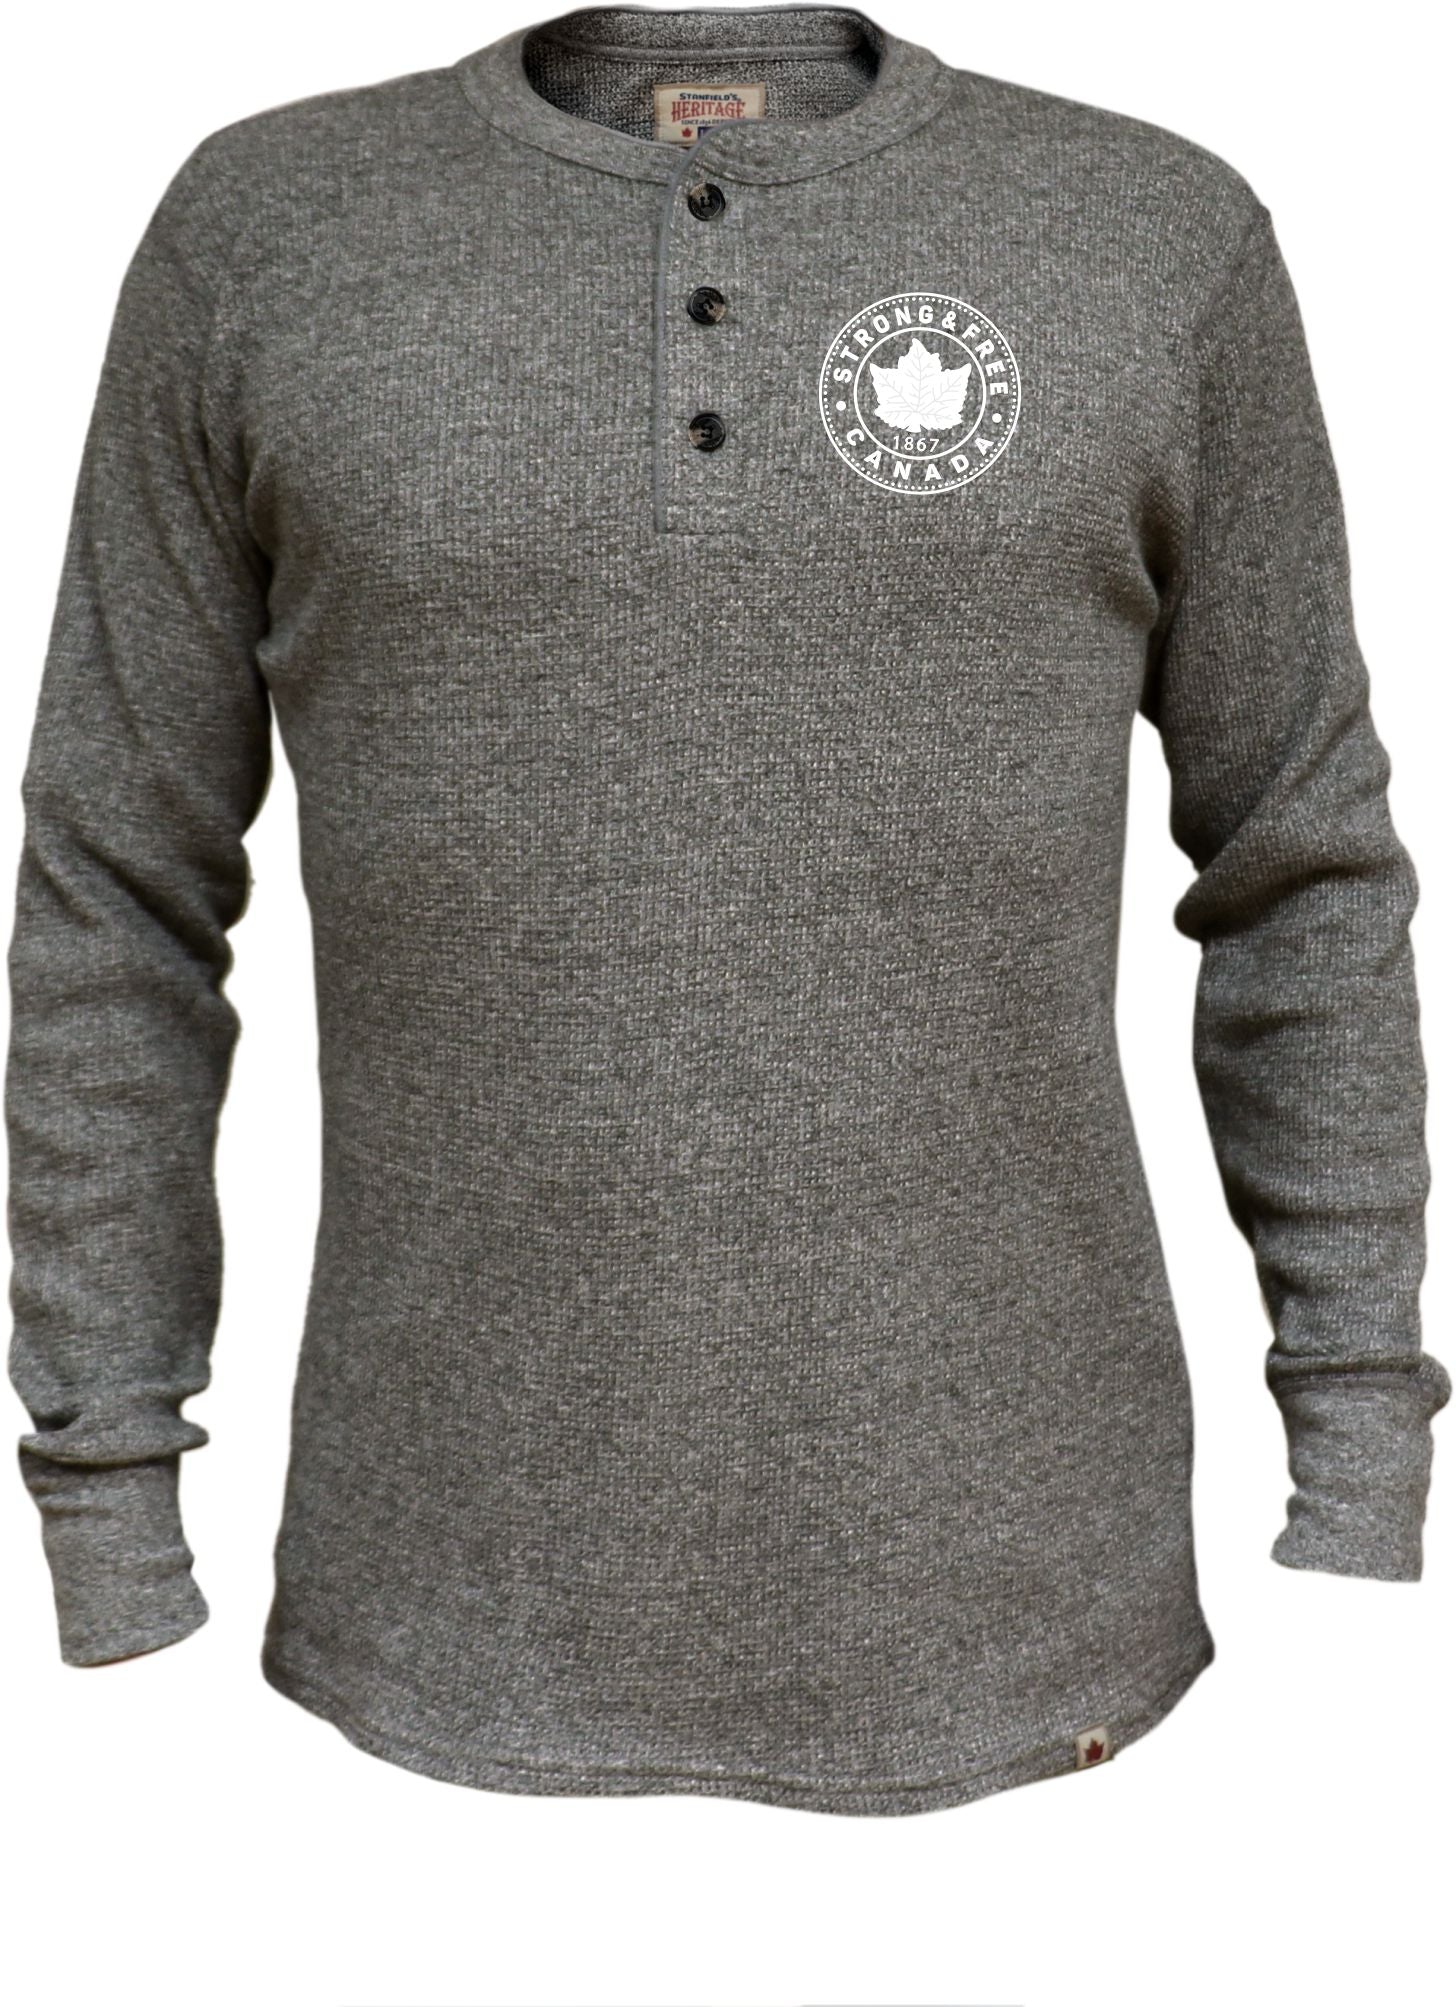 Men's Strong & Free™ Crest Embroidery Waffle Henley